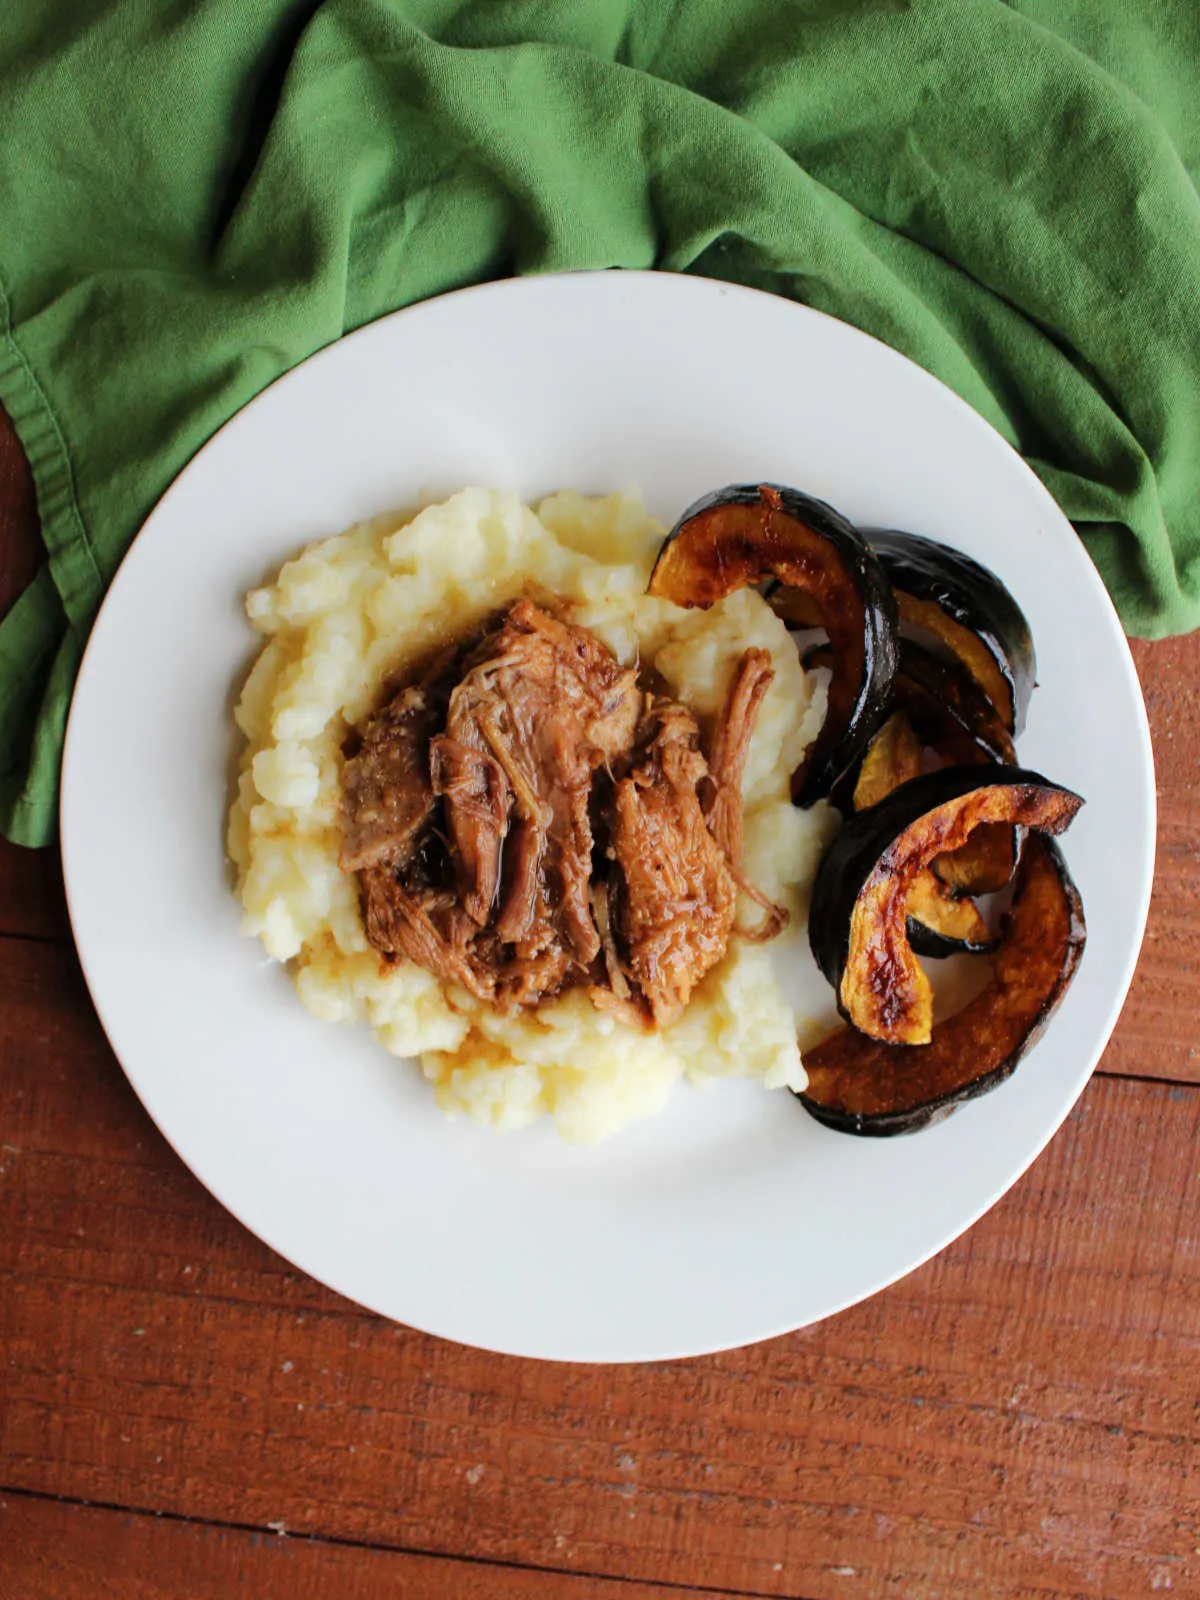 Dinner plate with roasted acorn squash, mashed potatoes and tender pork served in balsamic gravy.